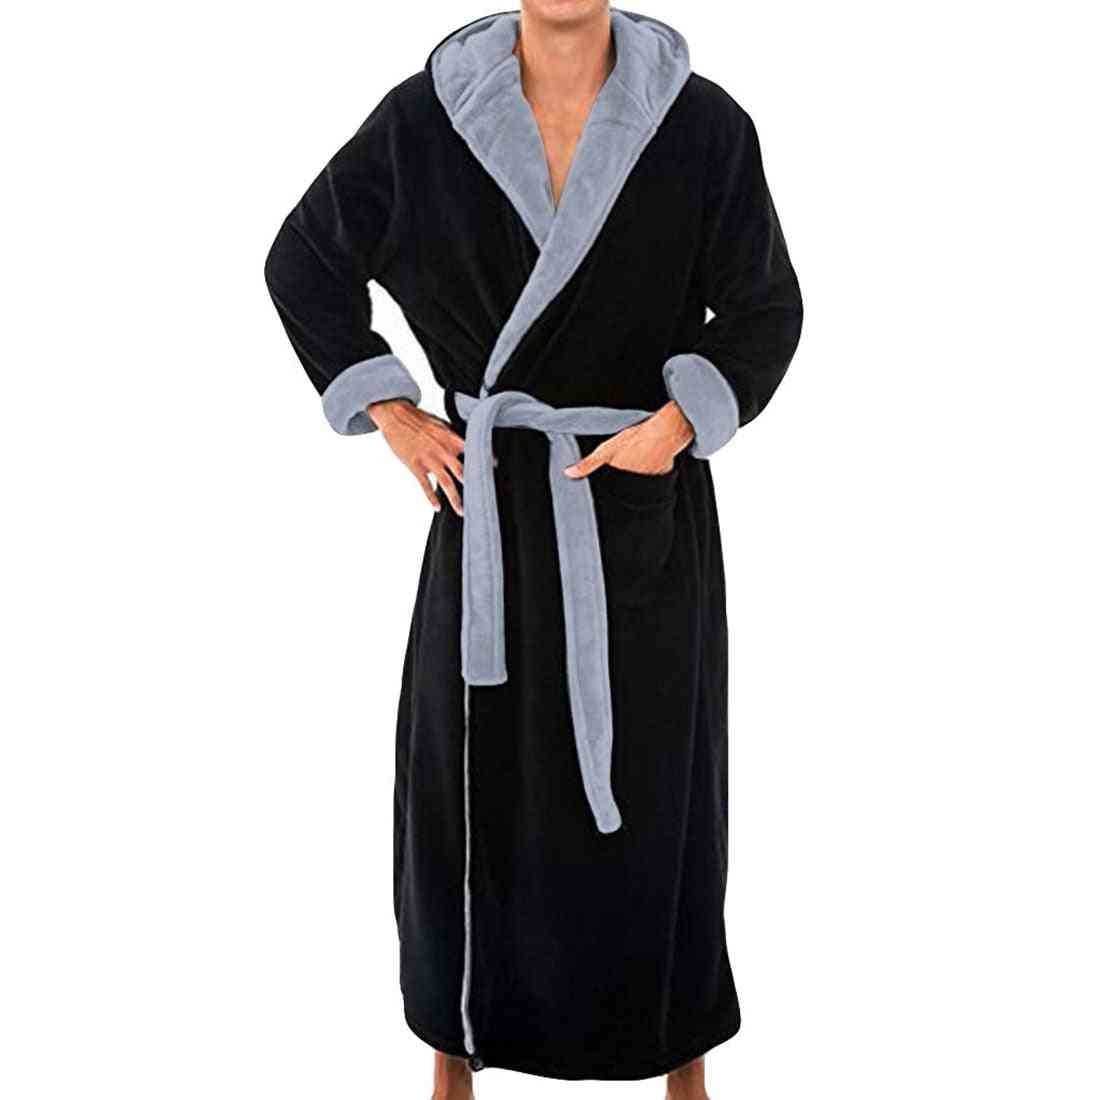 Flannel Hooded Thick Casual Winter Autumn Long Kimono Robe Pajama Nightgown